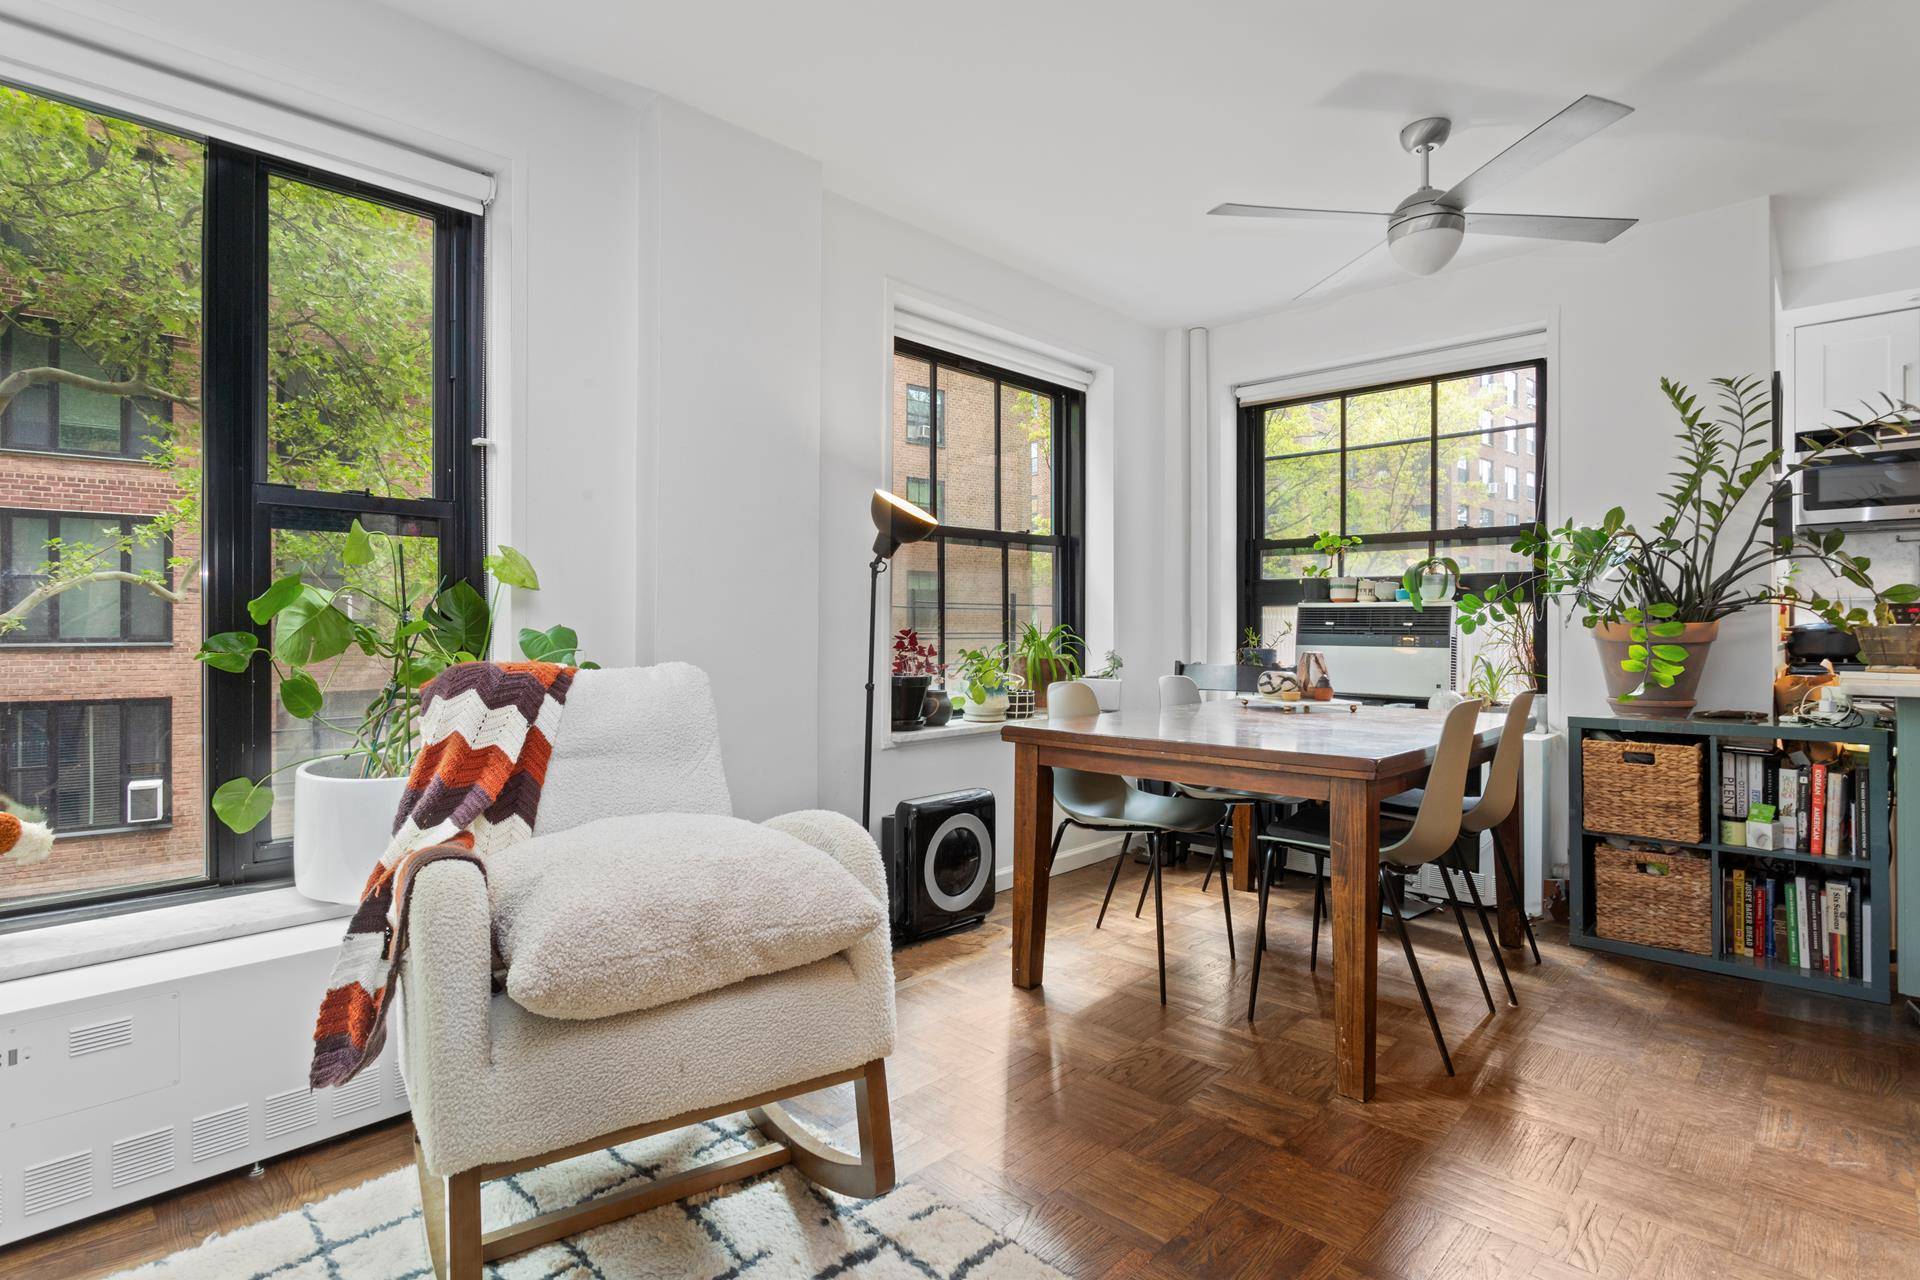 Discover urban tranquility in this spacious one bedroom home nestled in historic Clinton Hill.